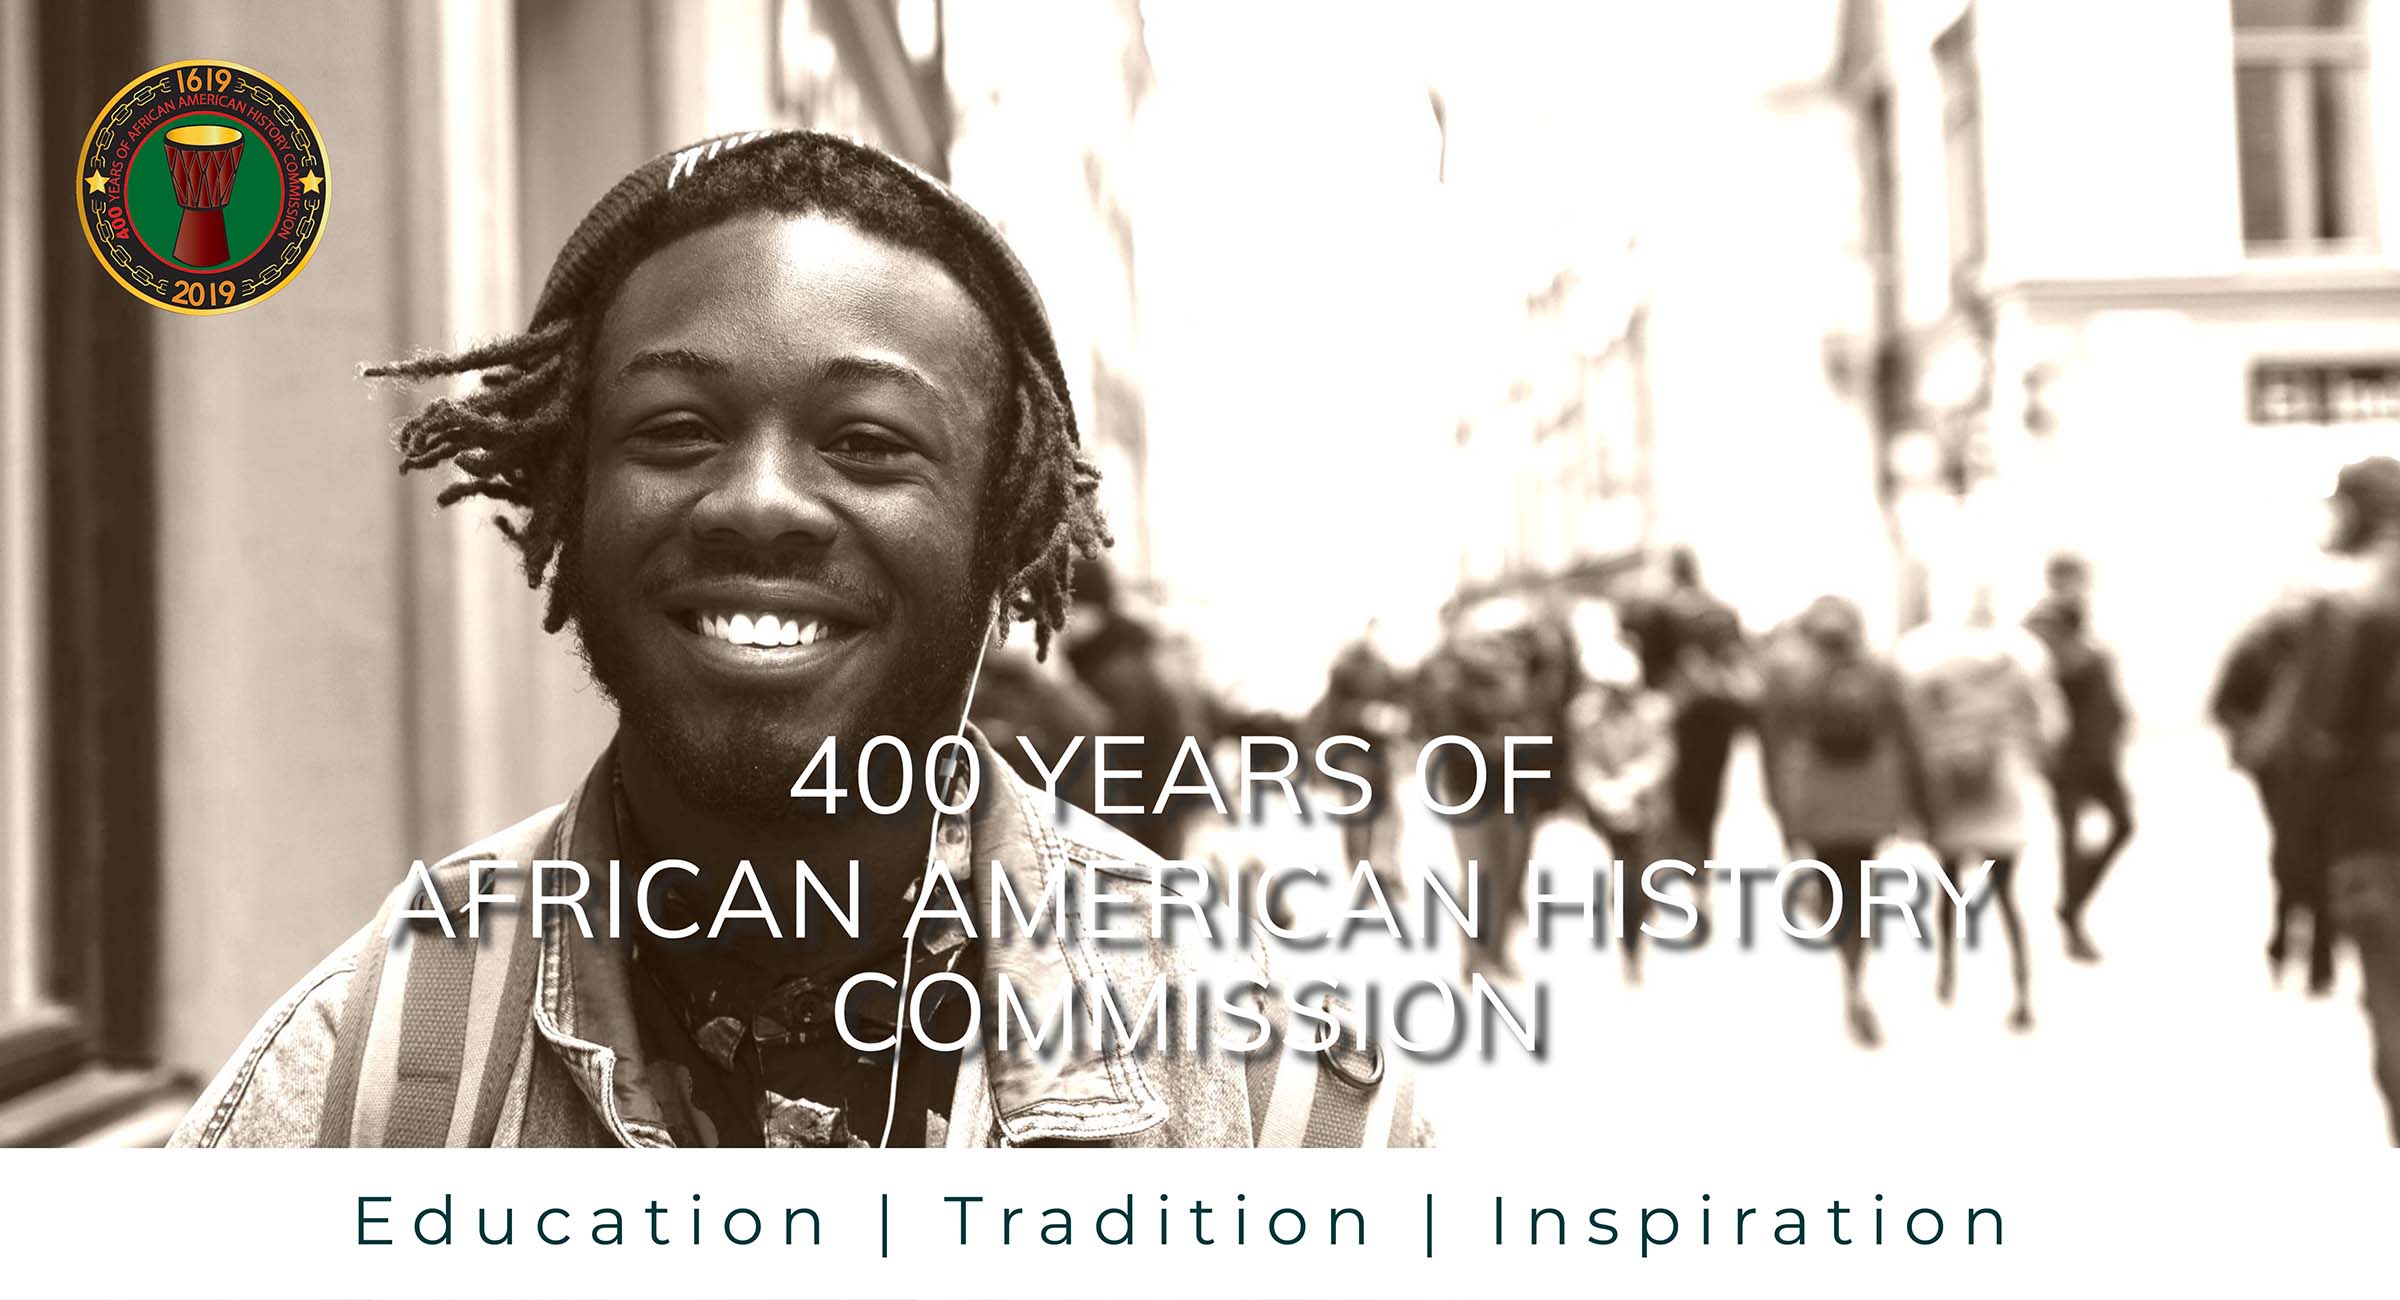 400 Years of African American History Commission